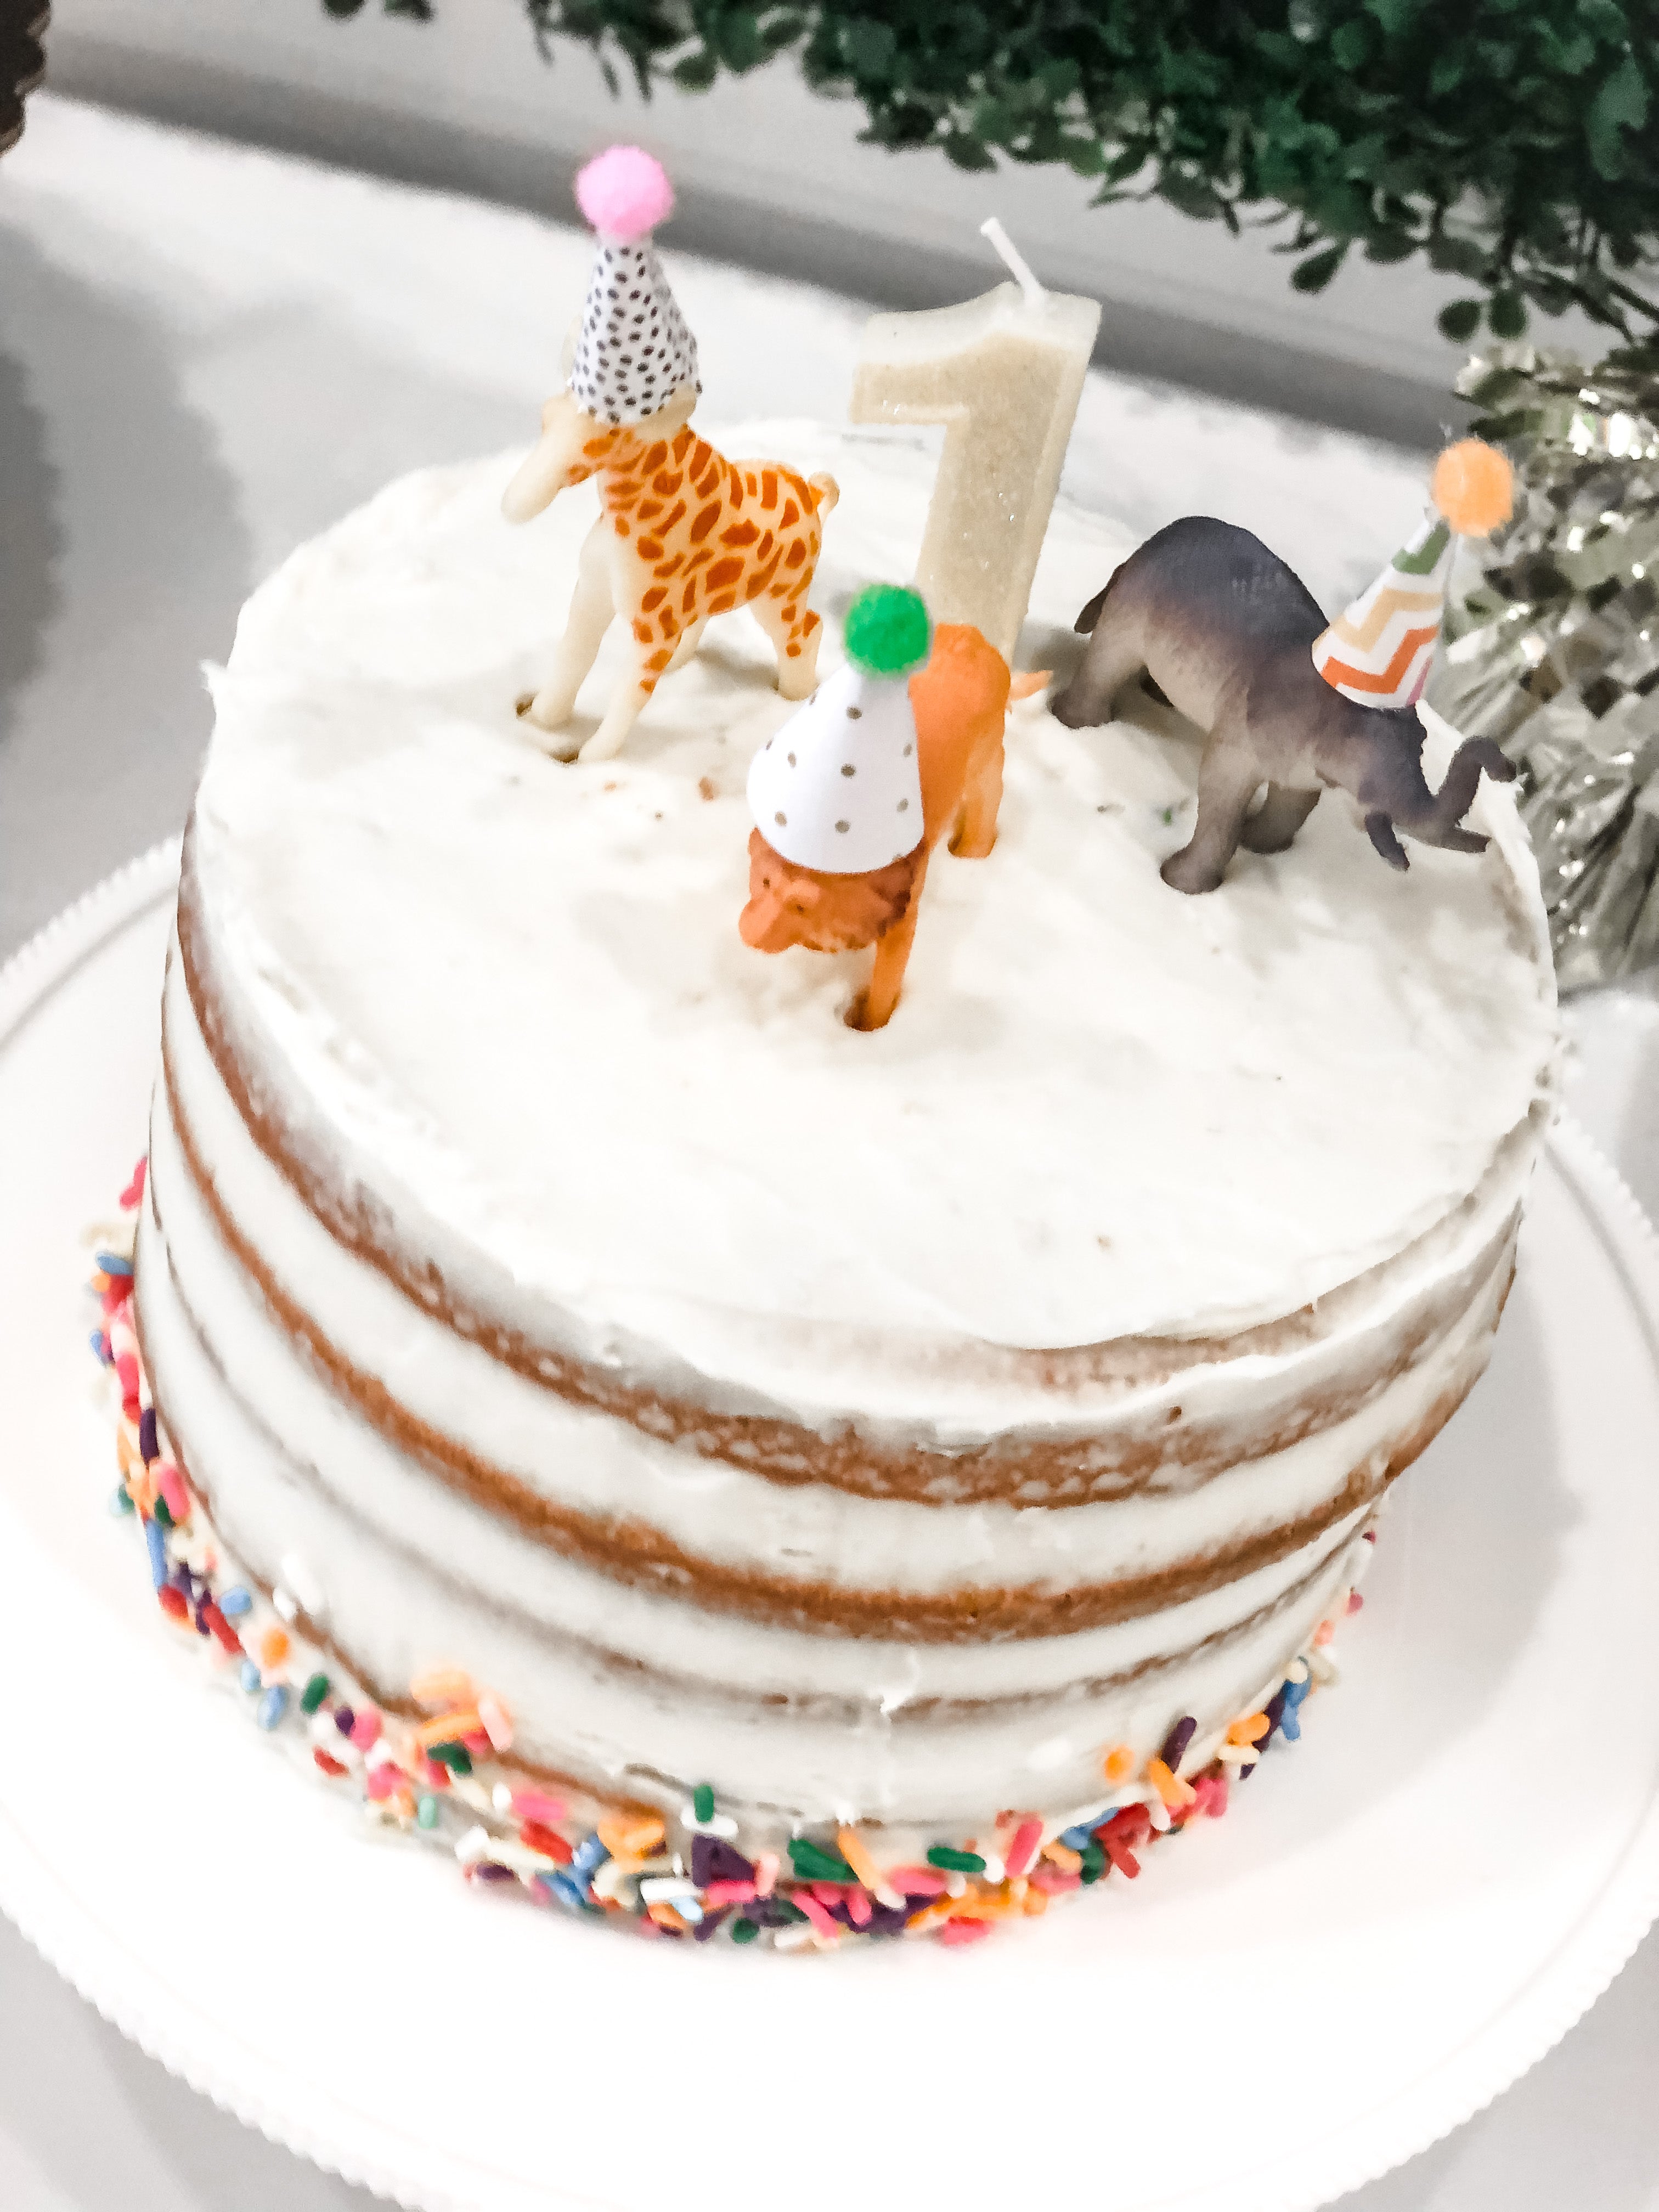 A one year old birthday cake with zoo animals and a Number 1 candle